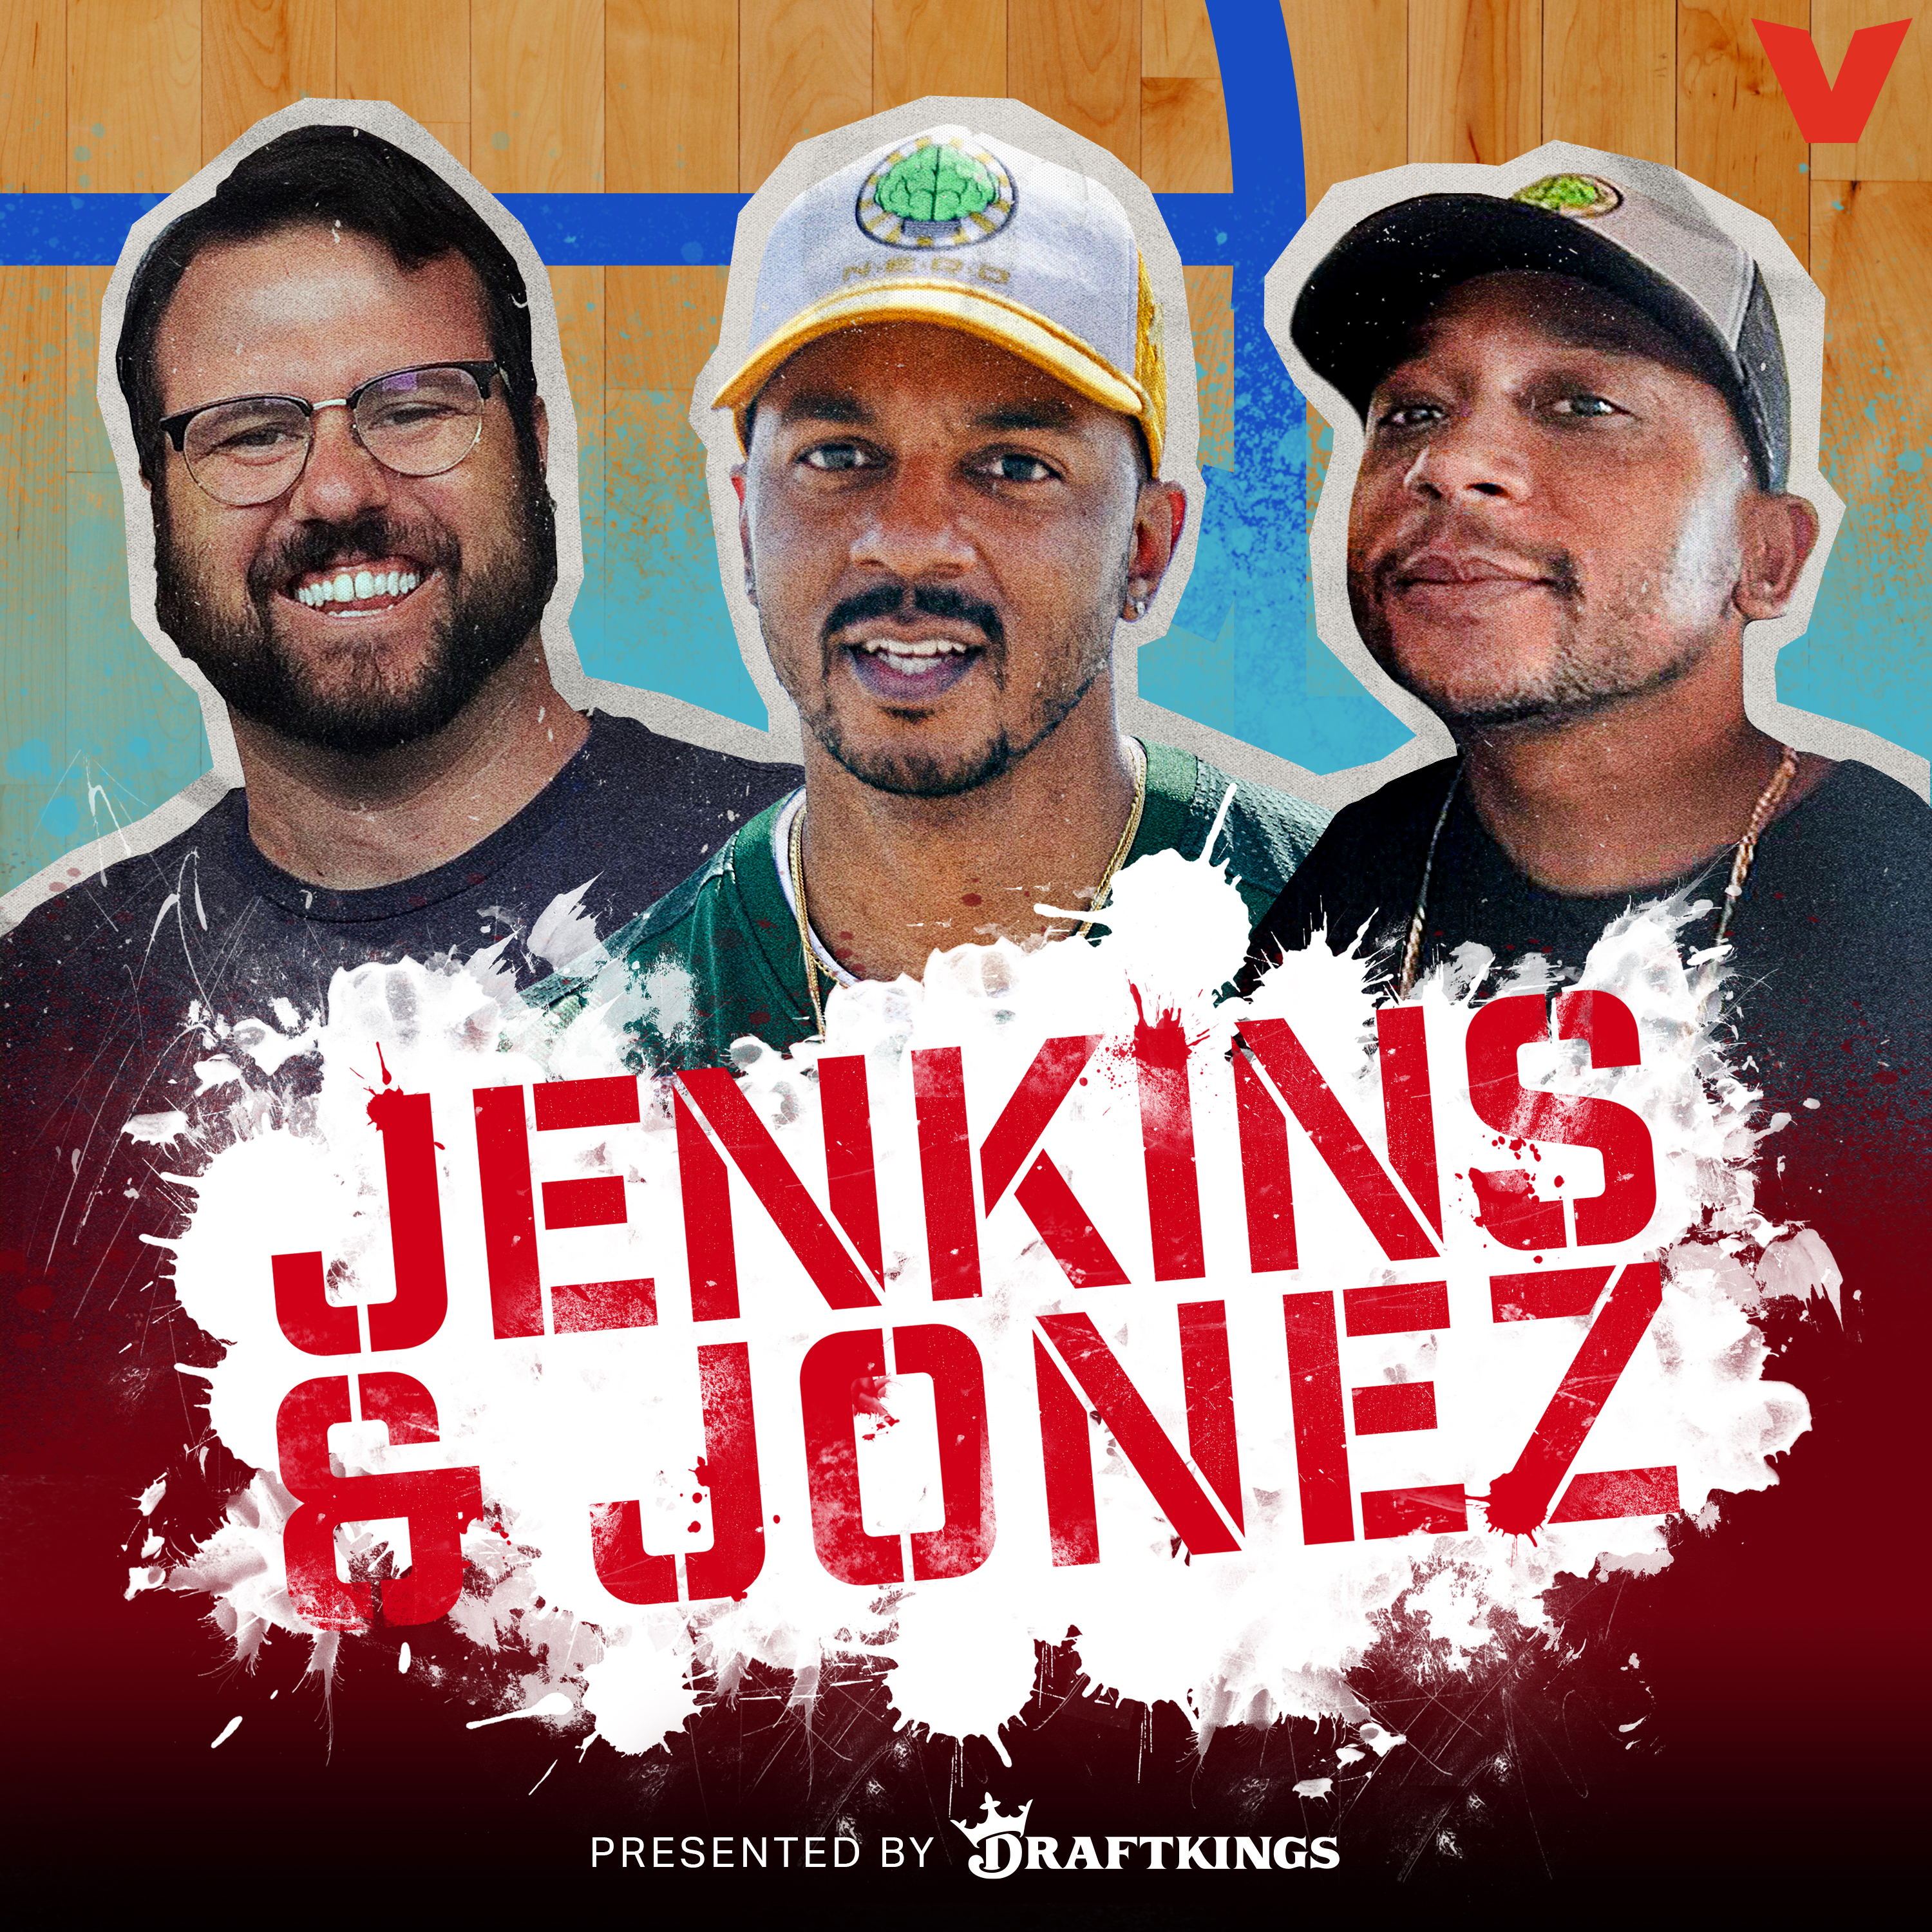 Jenkins and Jonez - John has a TV show coming out on ESPN